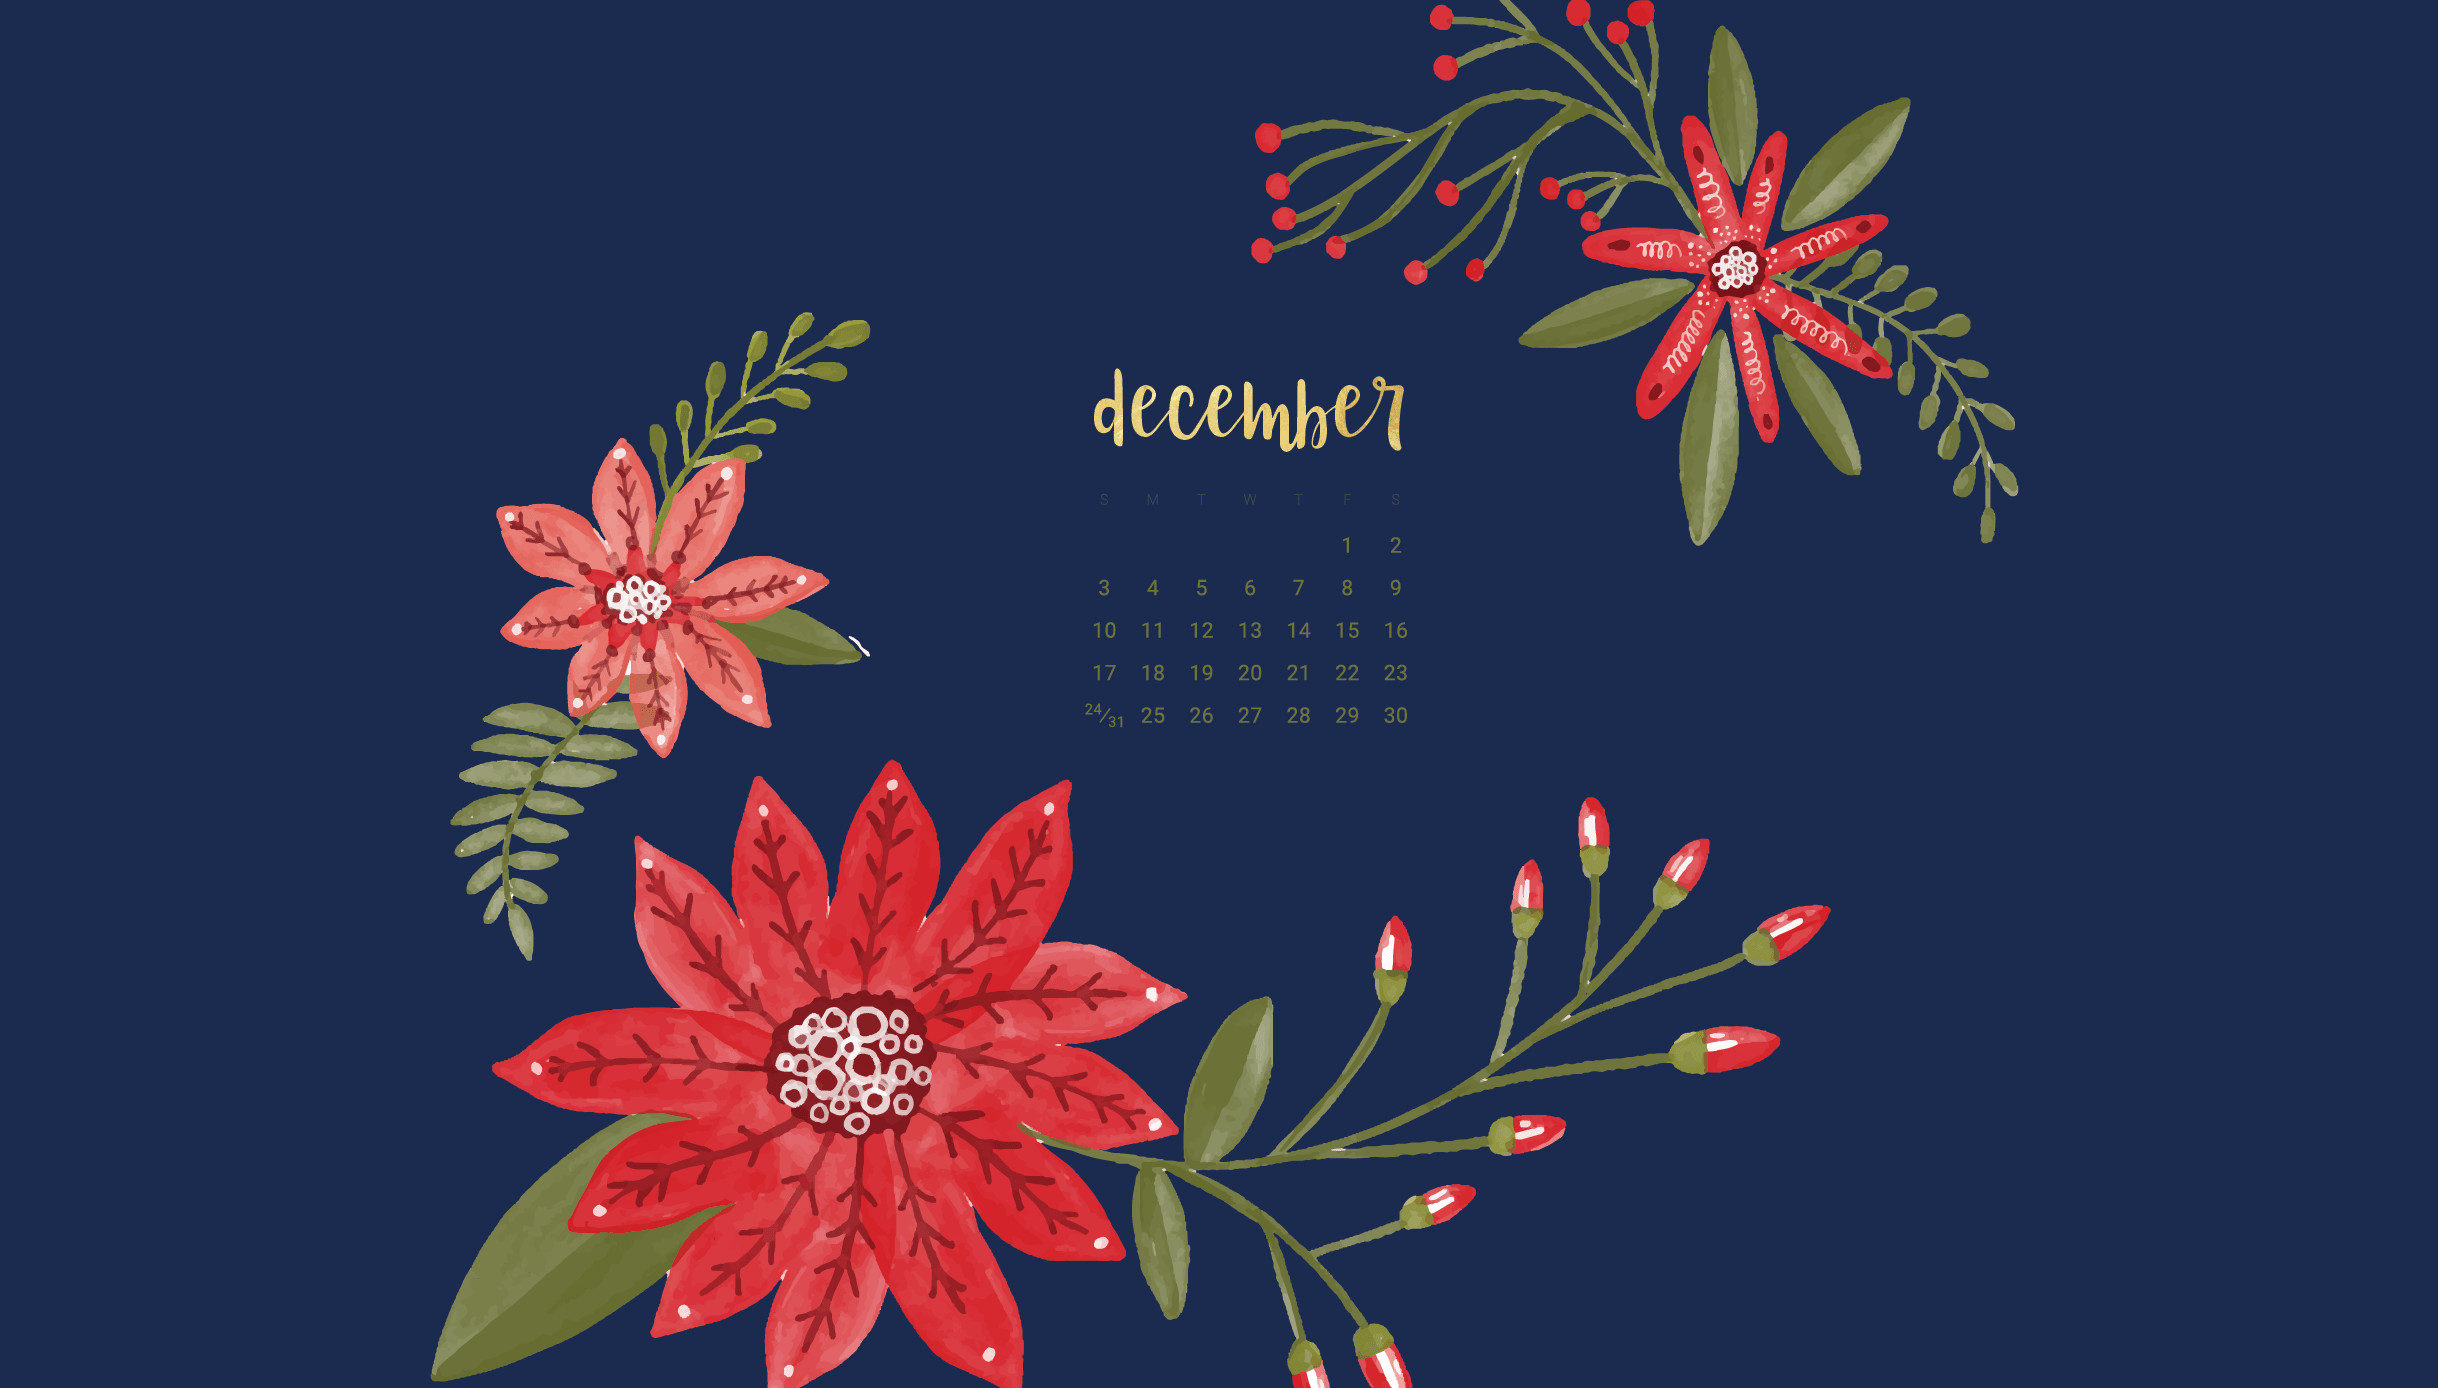 2438x1388 Oh So Lovely Blog shares 6 FREE December 2017 desktop and smart phone  wallpapers in both